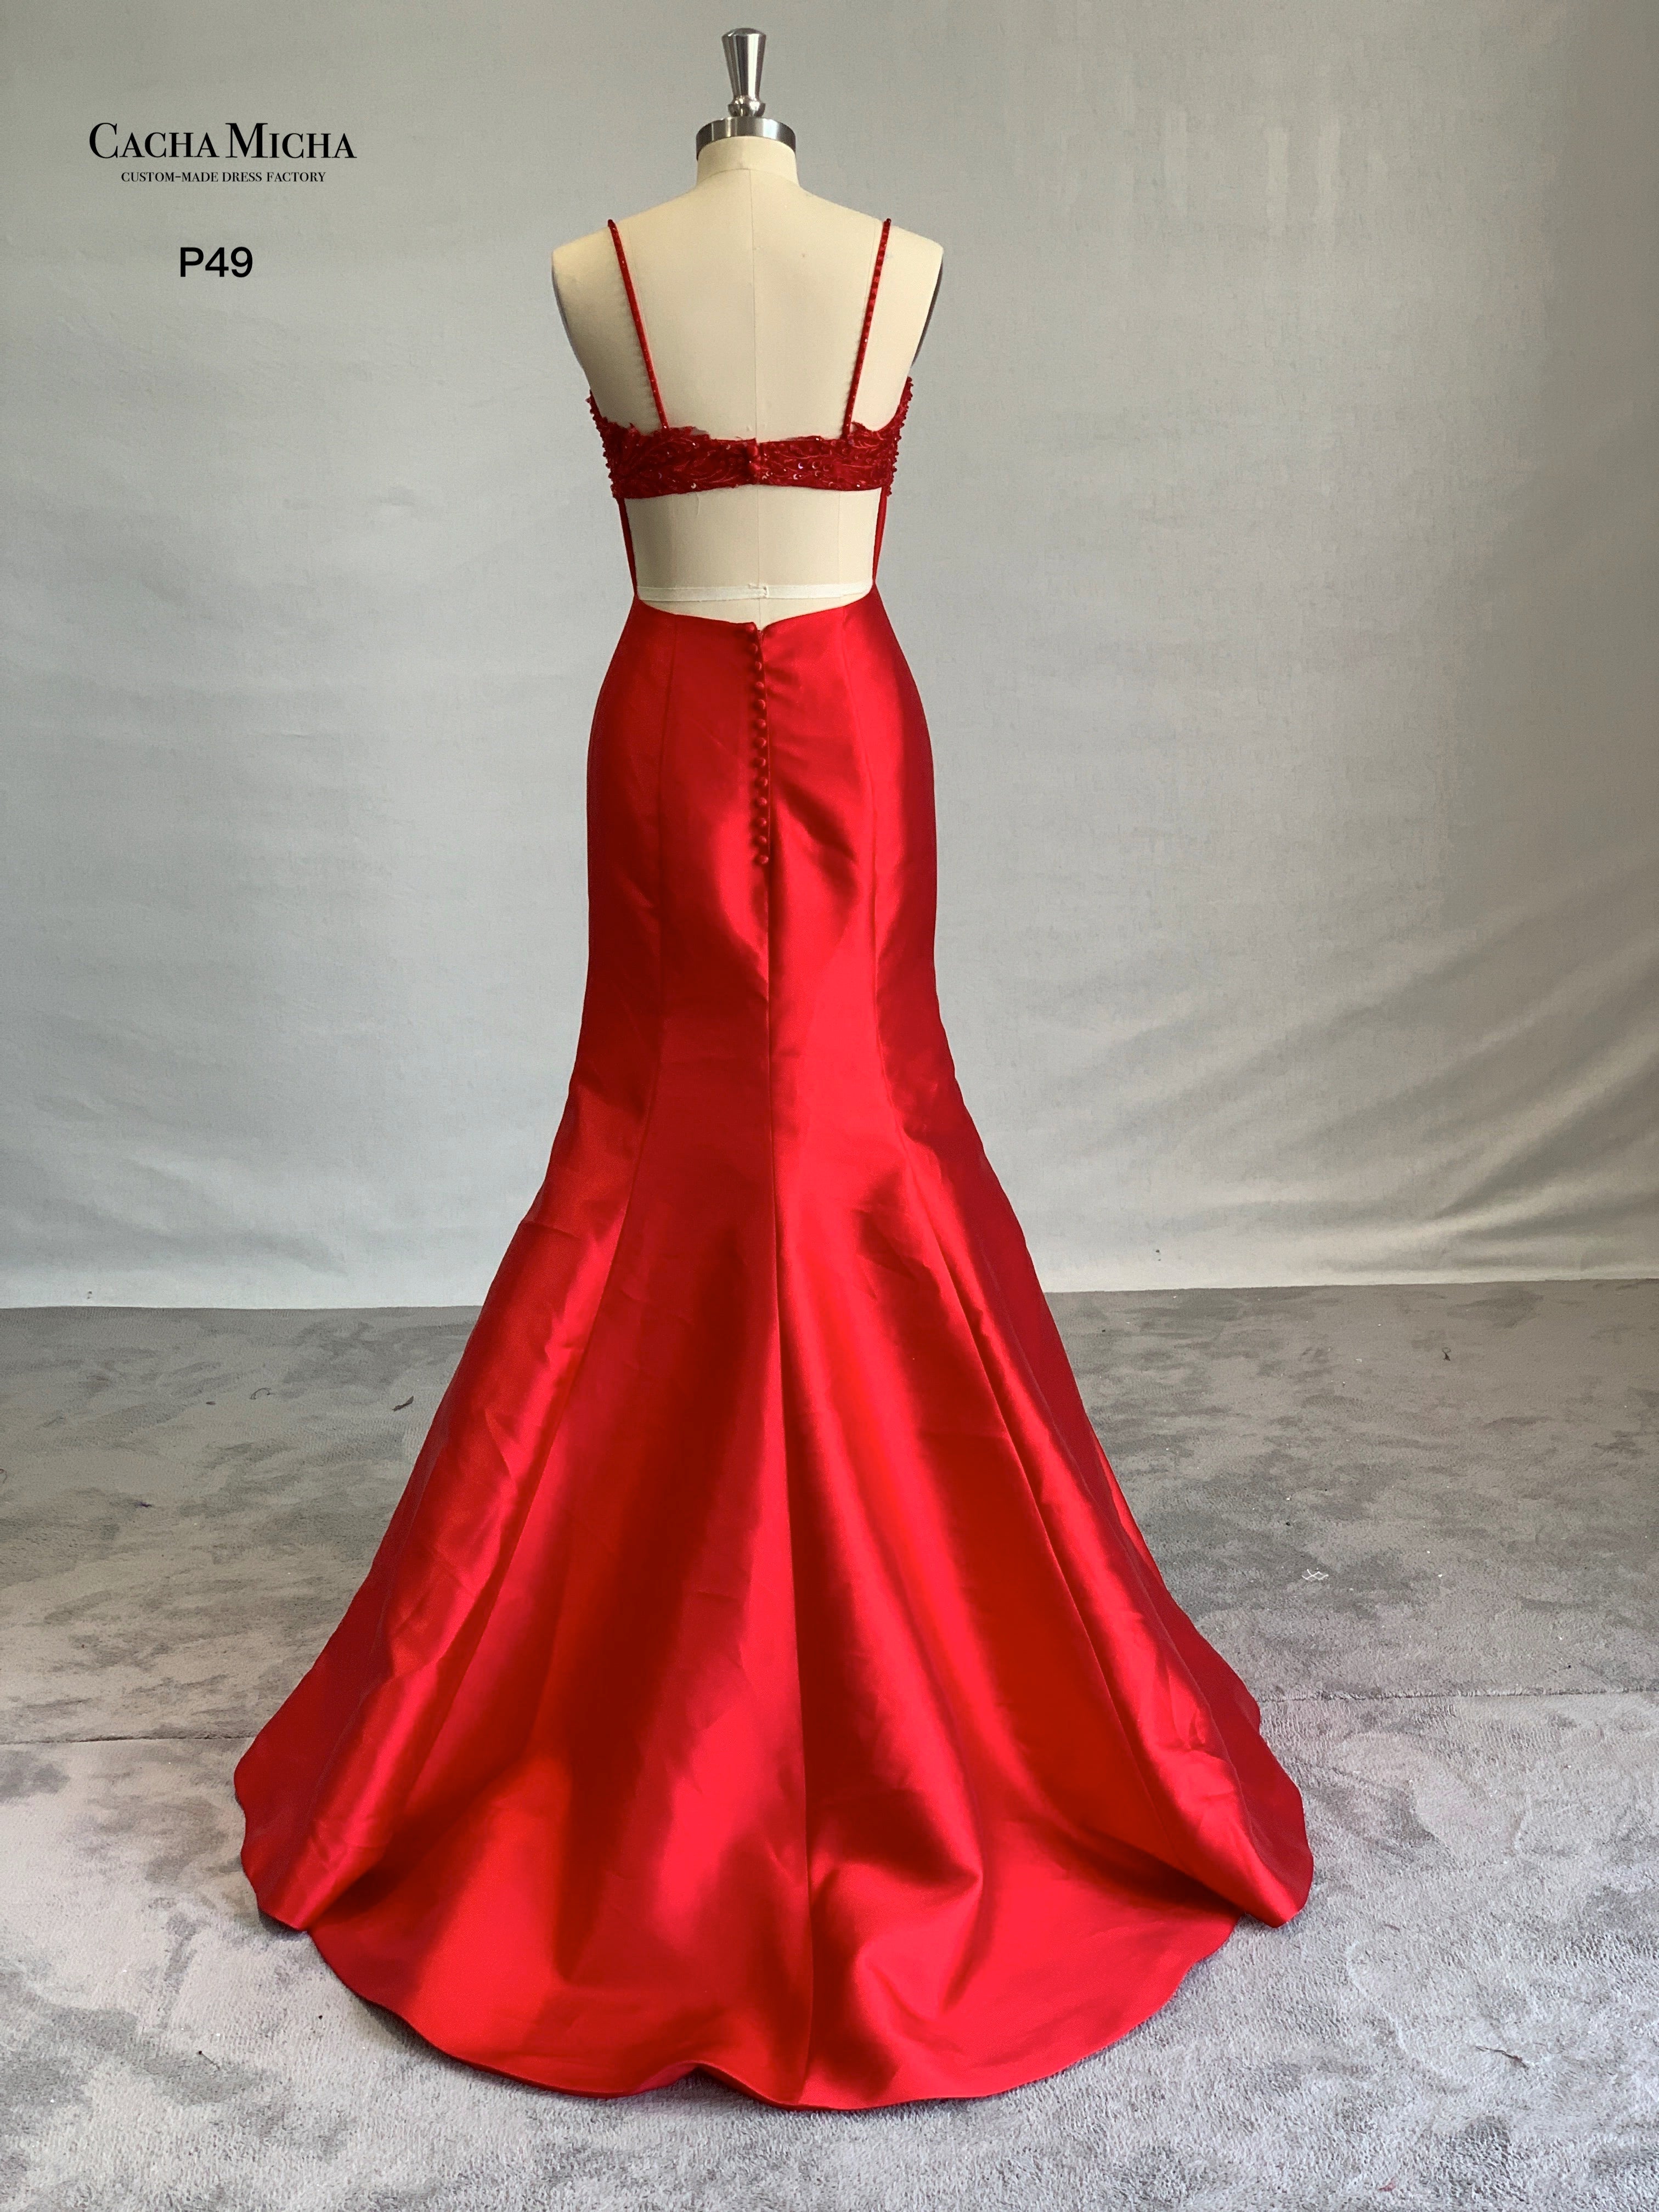 Sexy Open Back Red Mikado Prom Dress P49